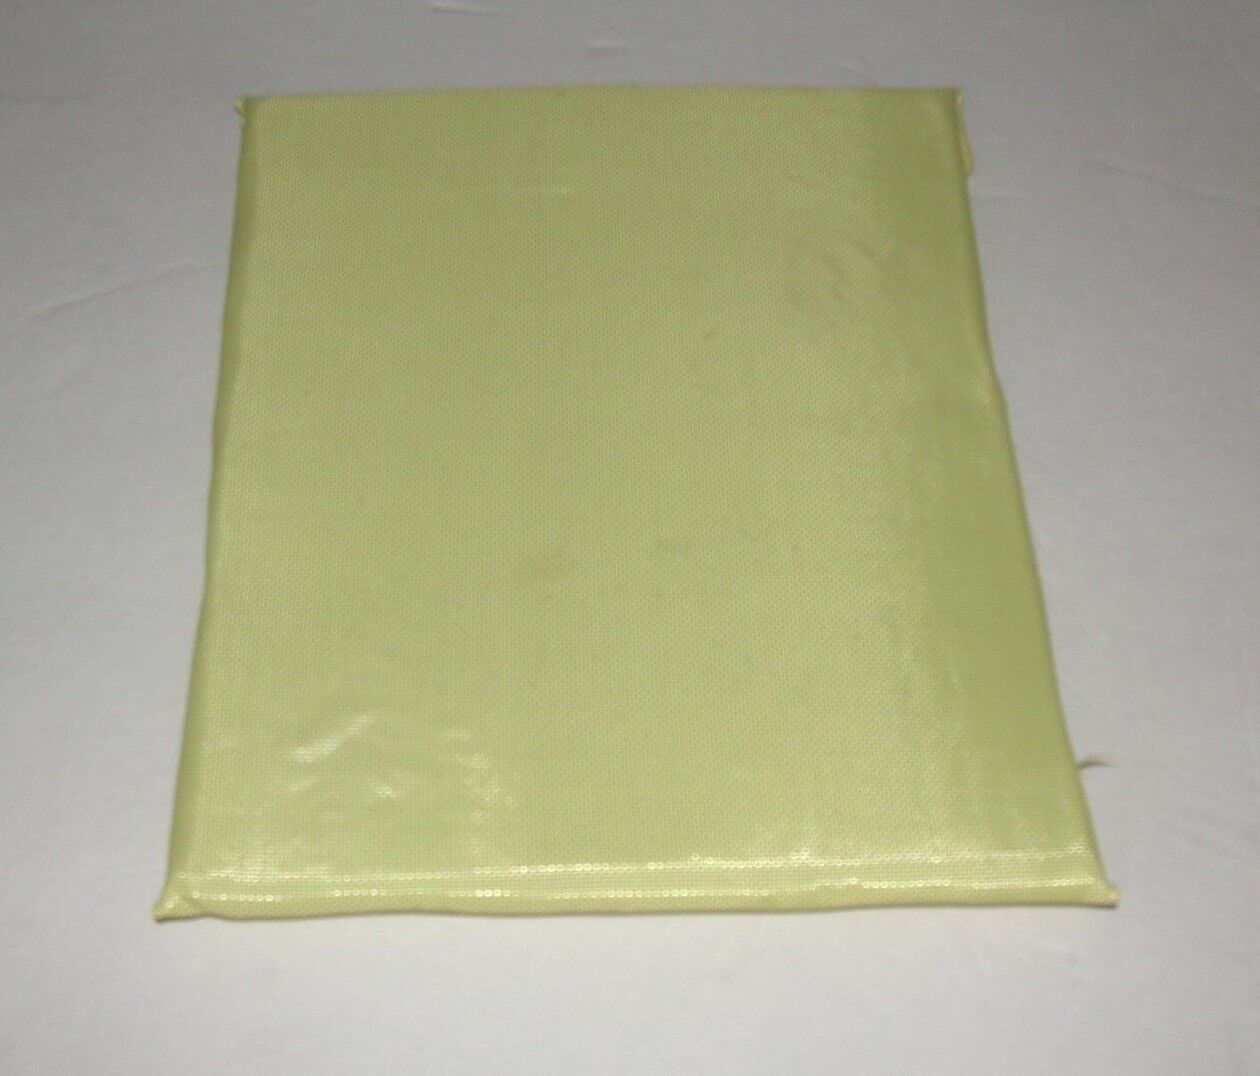 8x12 Level IIIA Body Armor Plate Bullet Proof Insert Made with DuPont Kevlar